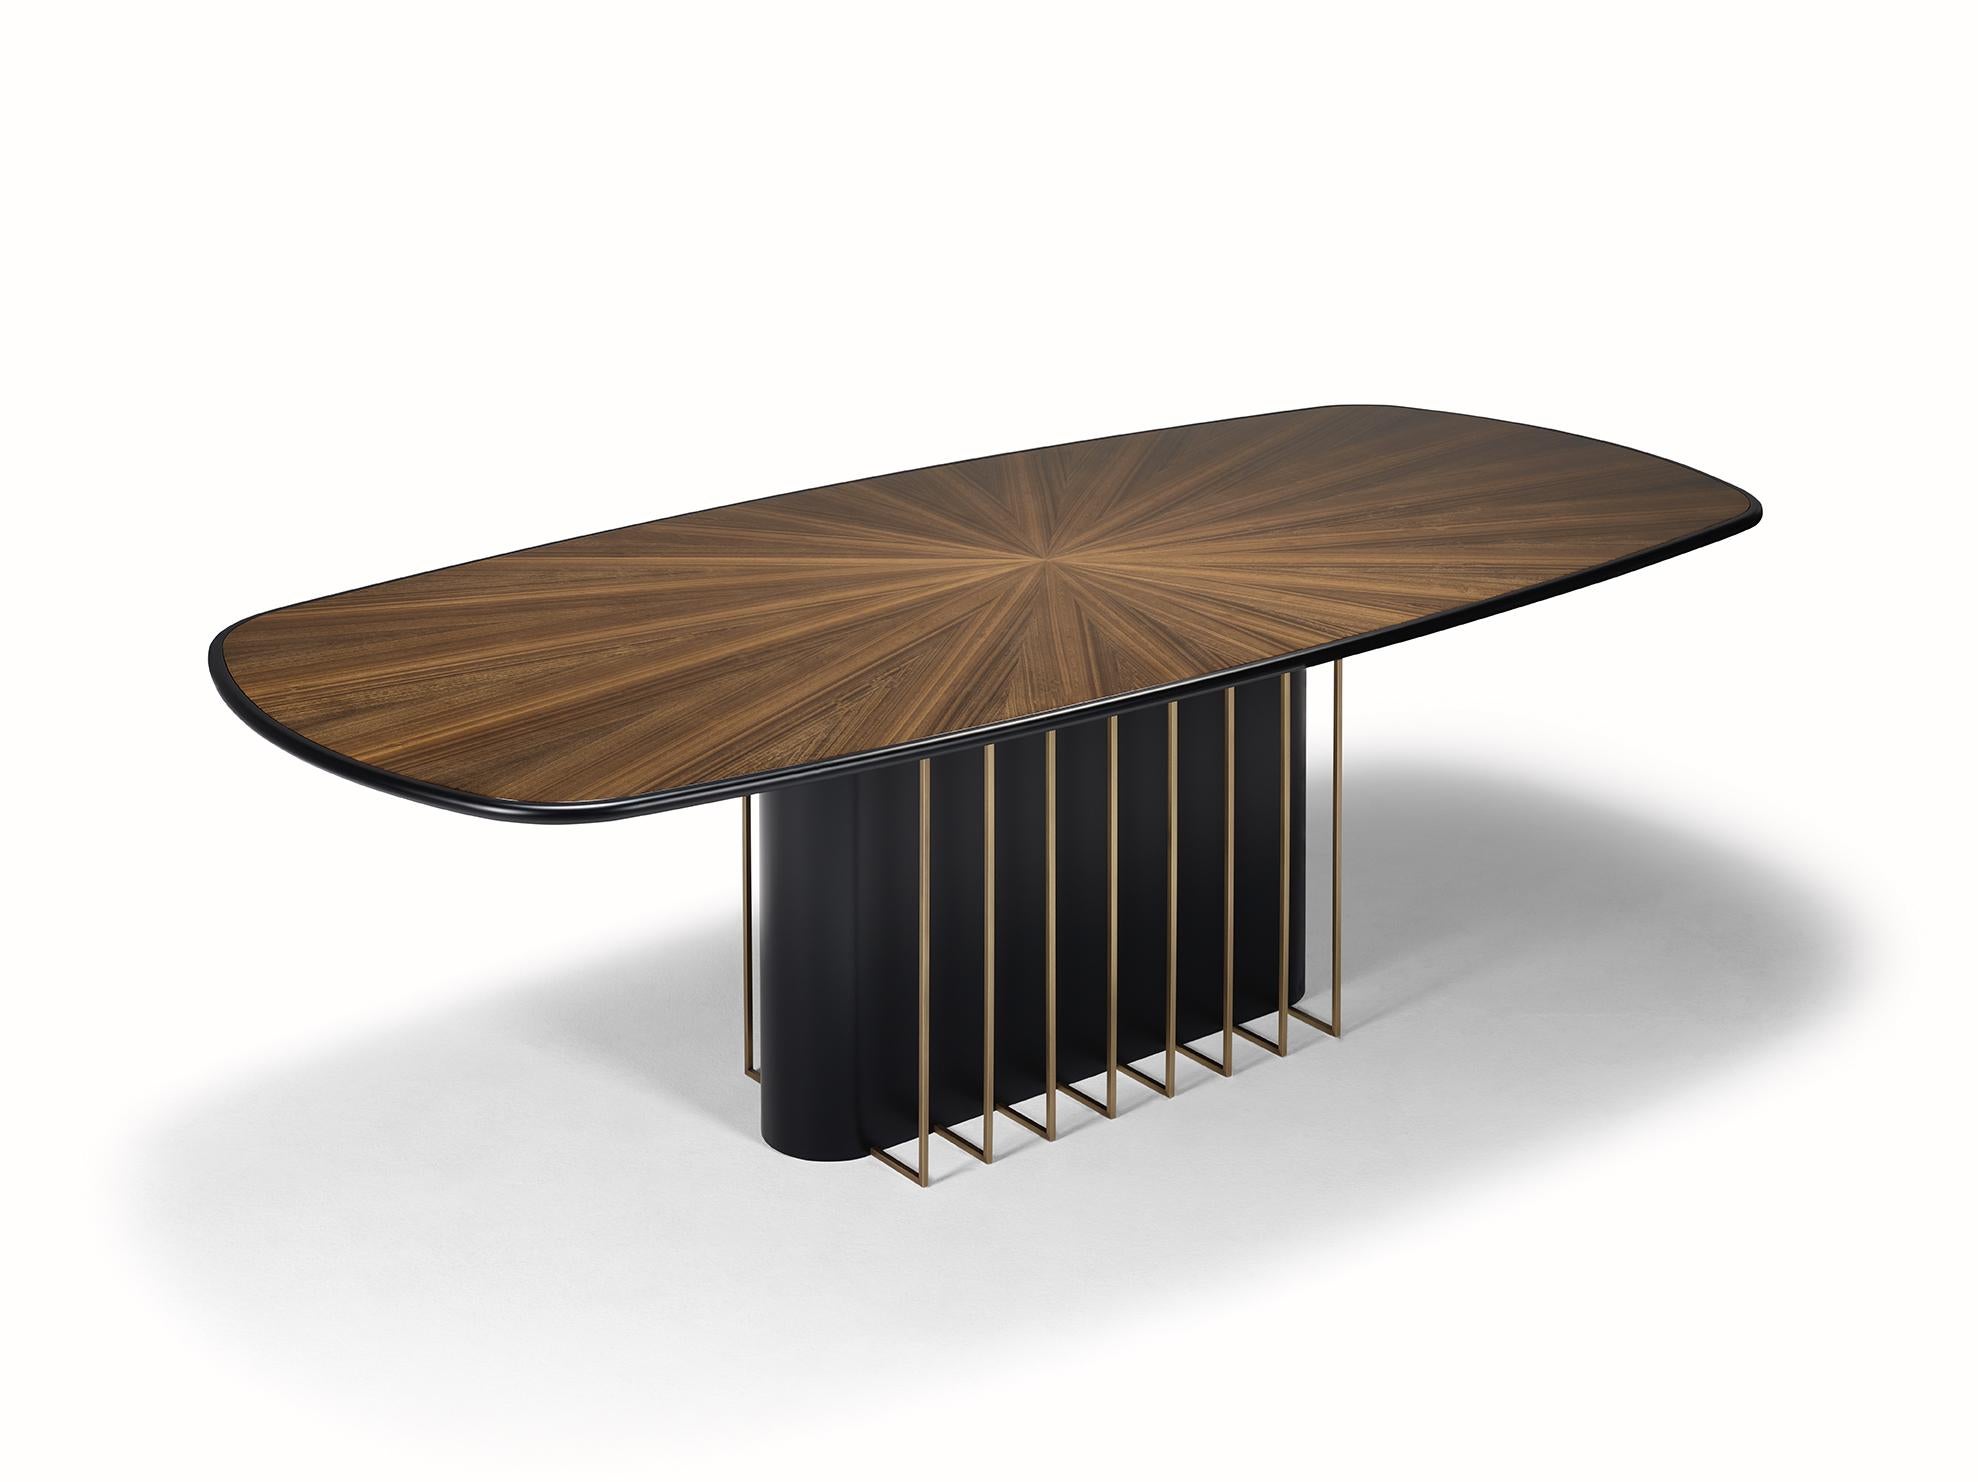 The distinguished GARBO dining table is graced by the subtlety of its shapes, with simple lines but full of character. Garbo is made of wood, enriched with a brass frame on the base for a refined and sophisticated look. Made of a wooden structure,